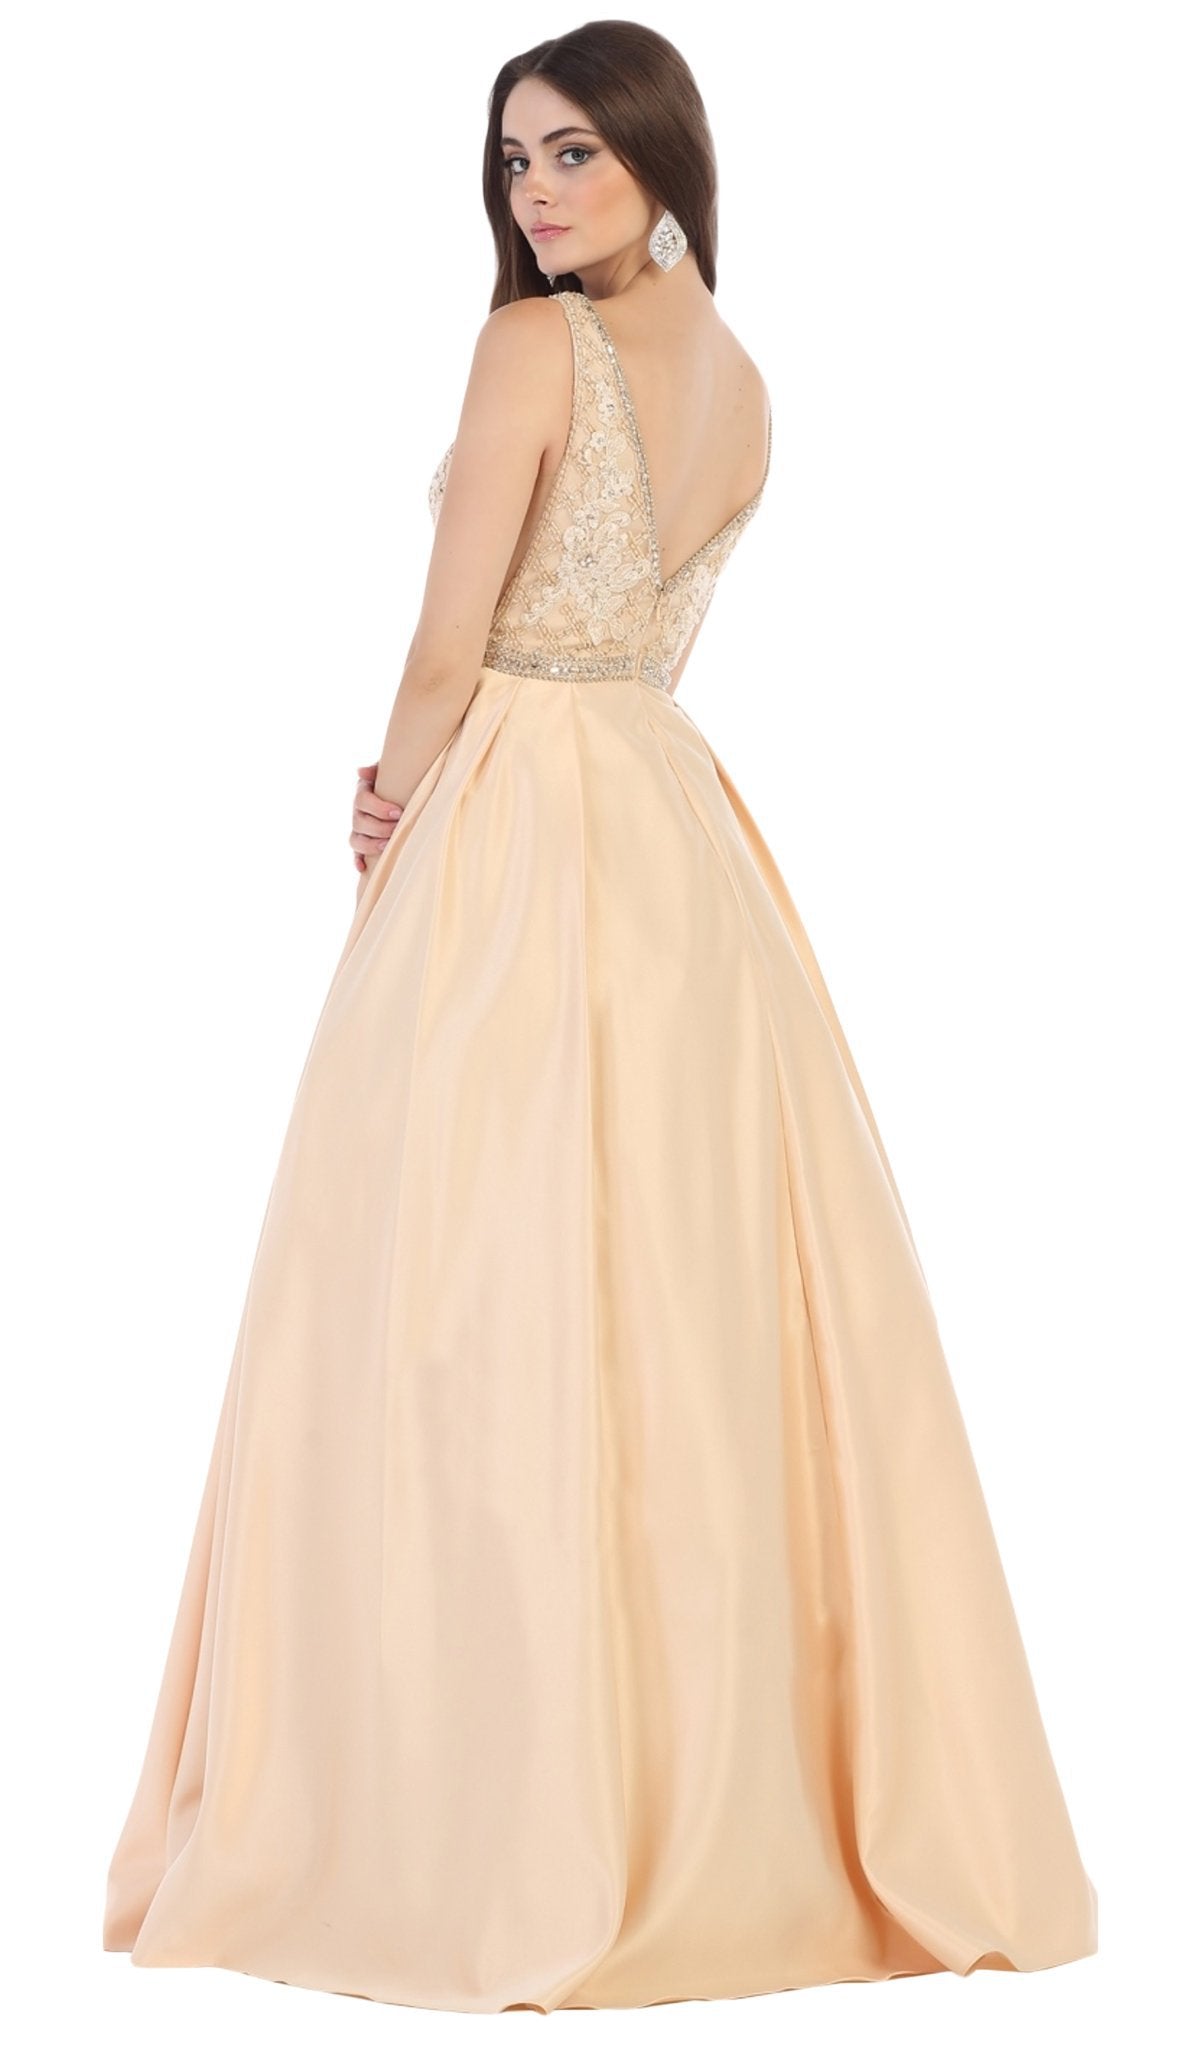 May Queen - MQ1581 Beaded Embroidered Plunging Ballgown Special Occasion Dress